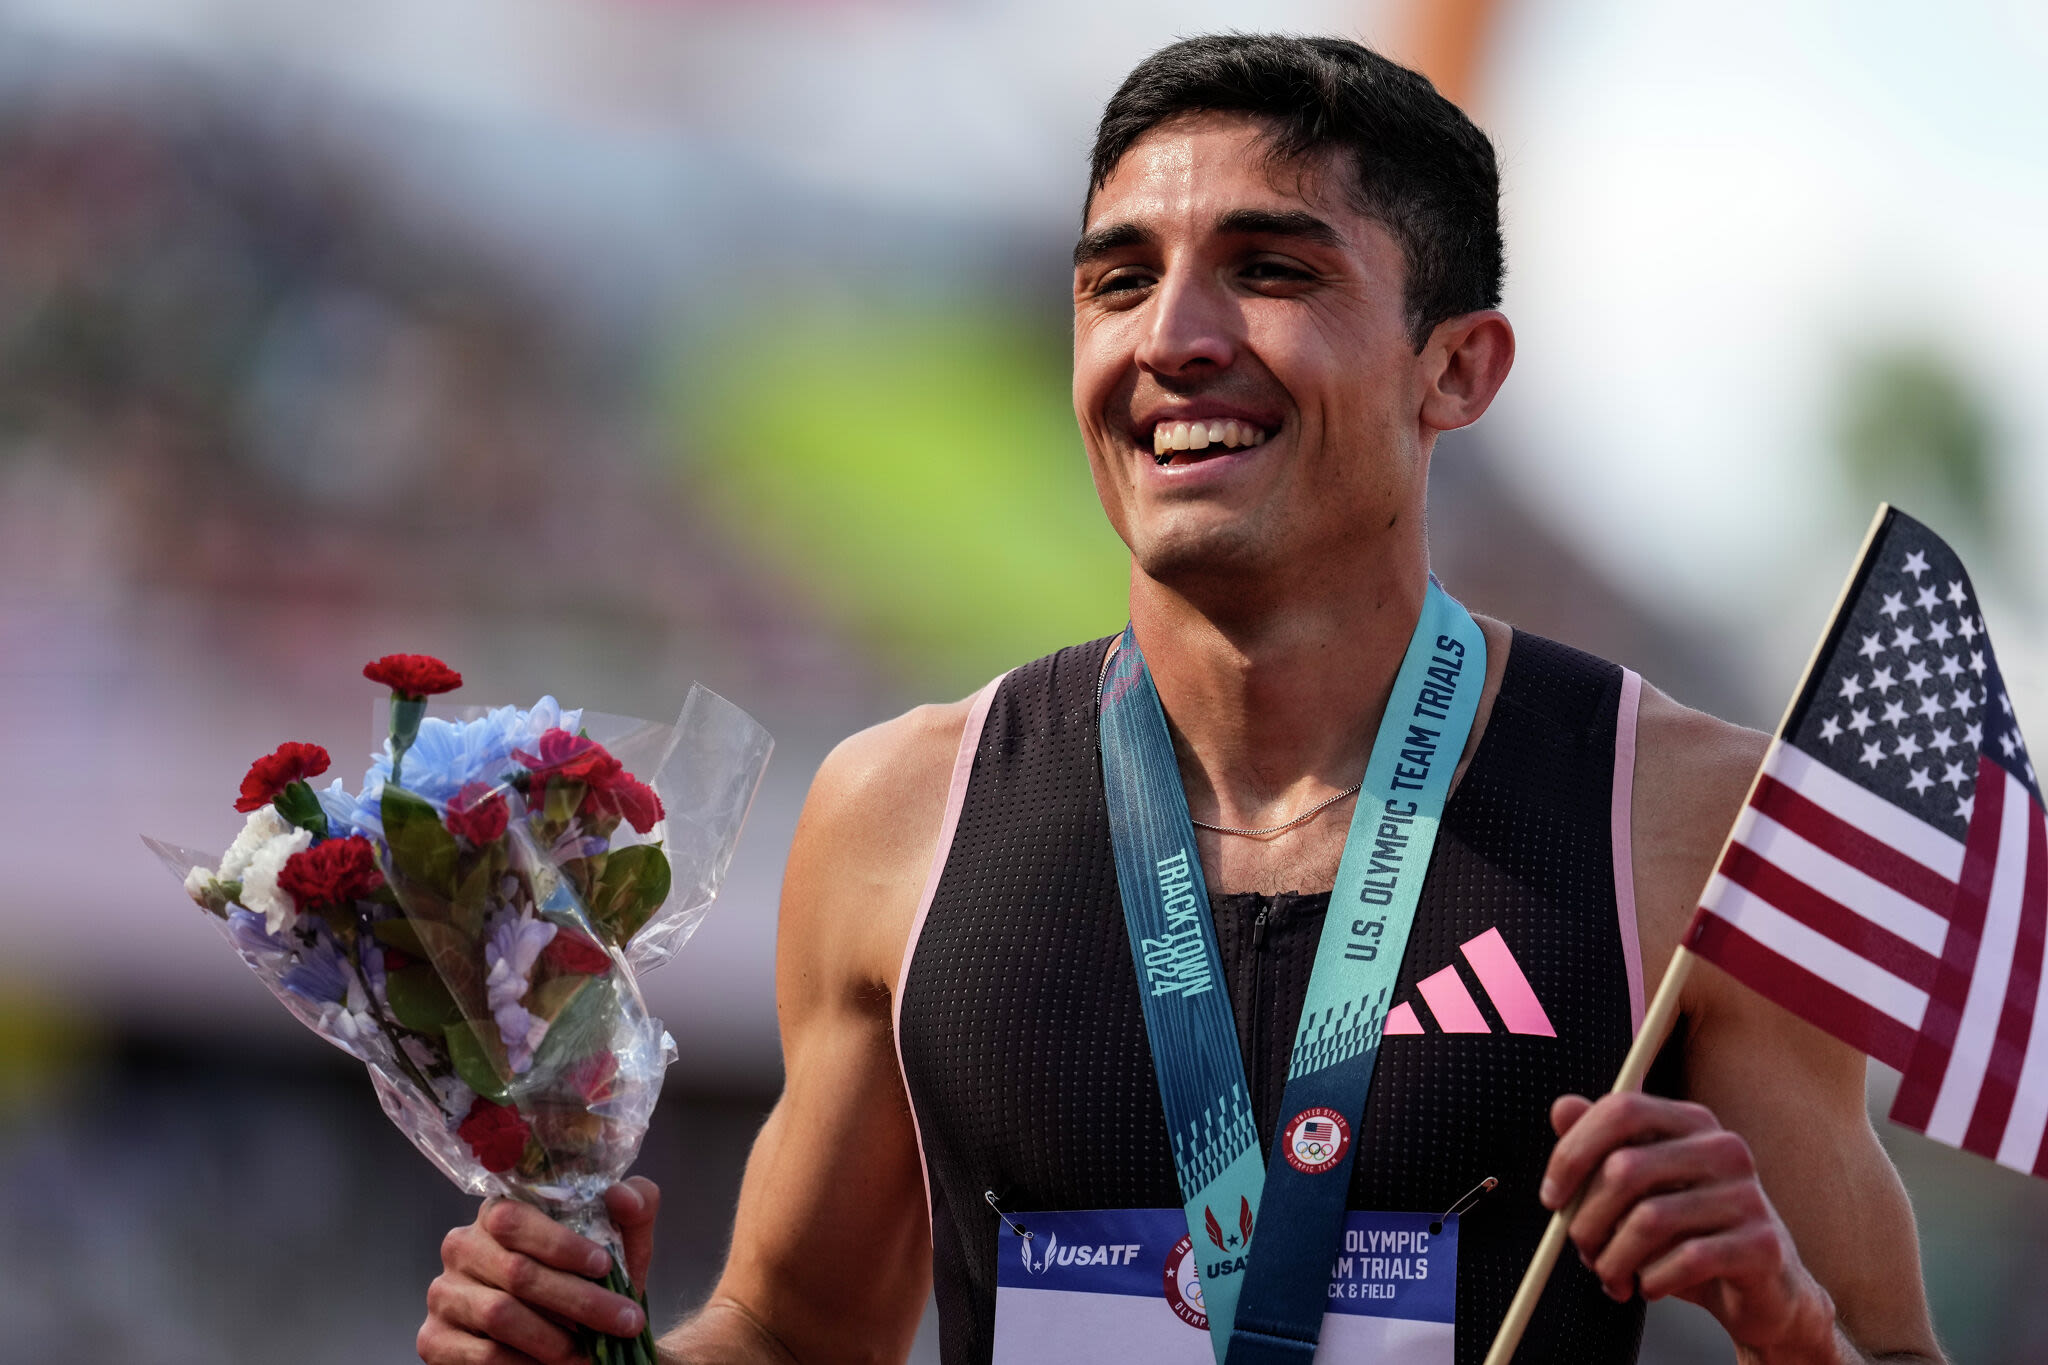 Bryce Hoppel's family shares memories of his Olympic journey